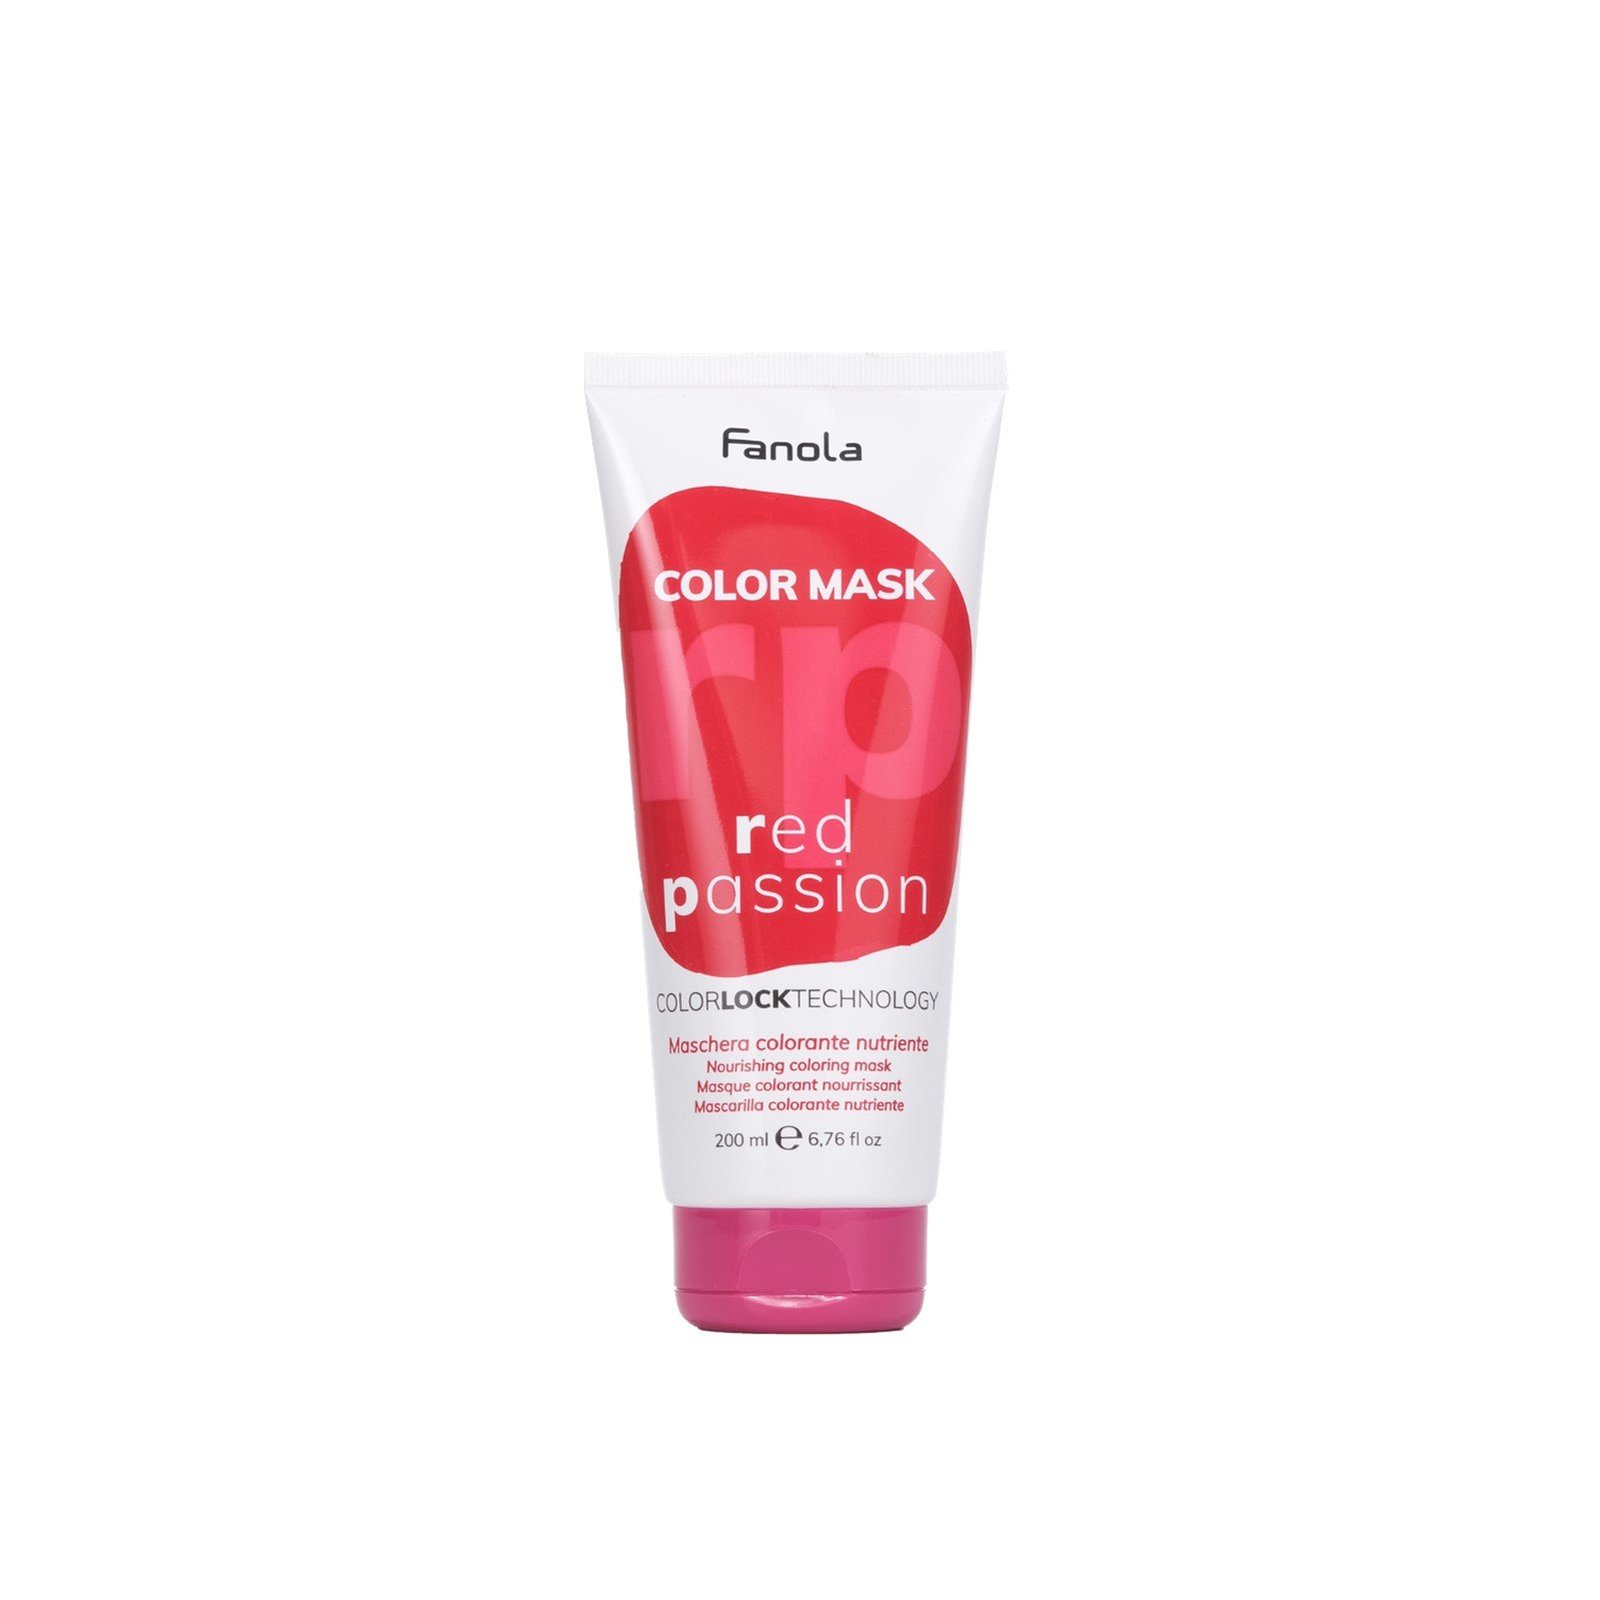 Fanola Color Mask Red Passion Nourishing Coloring Hair Mask 200ml (6.76 fl oz)